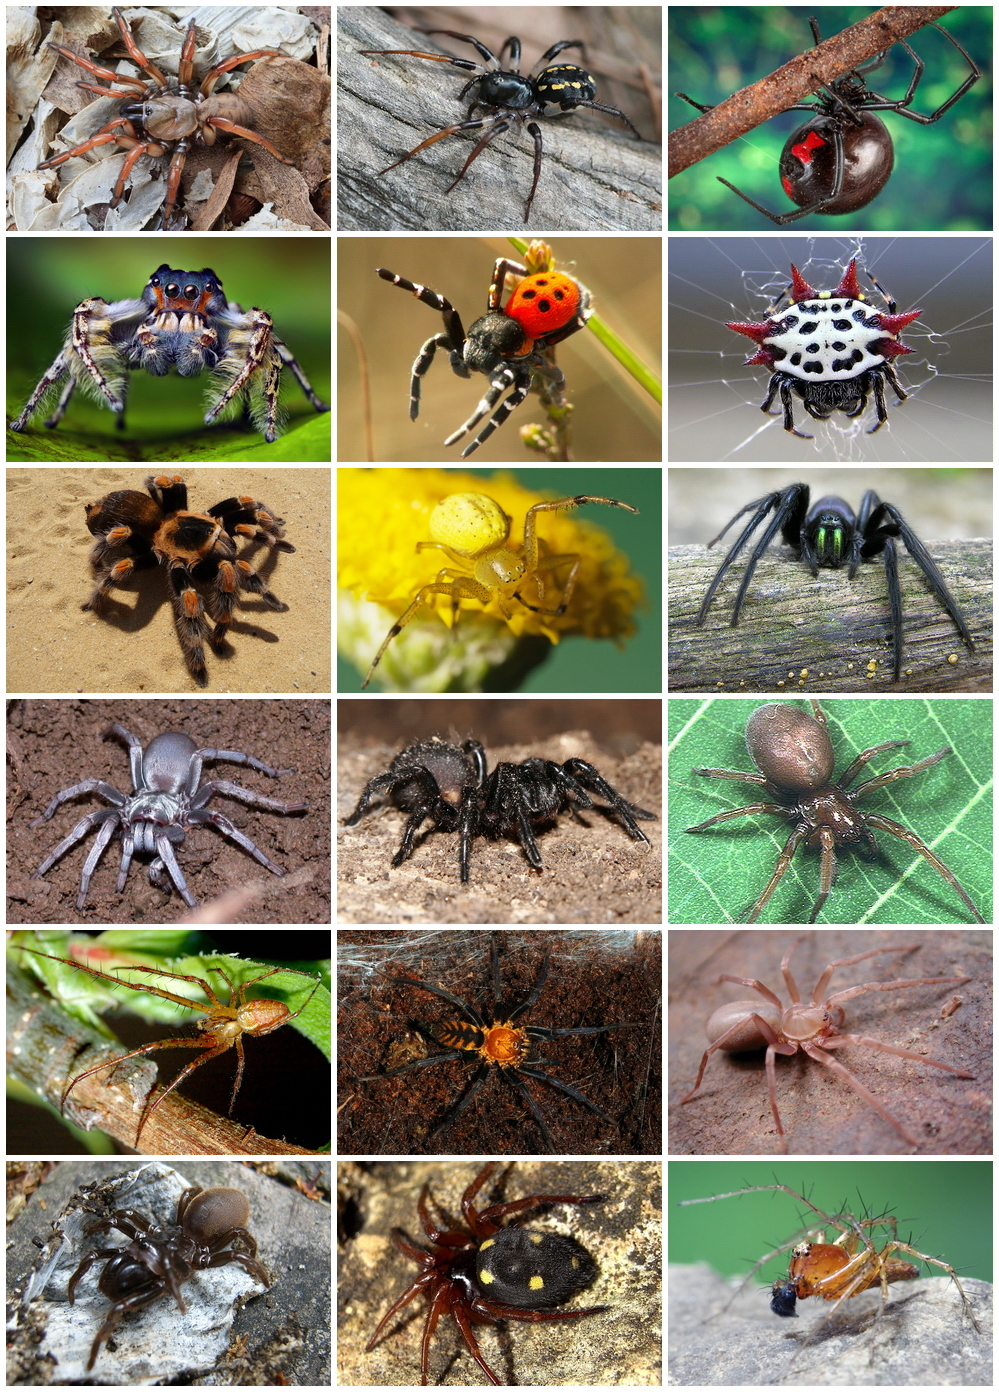 Different Types Of Spiders